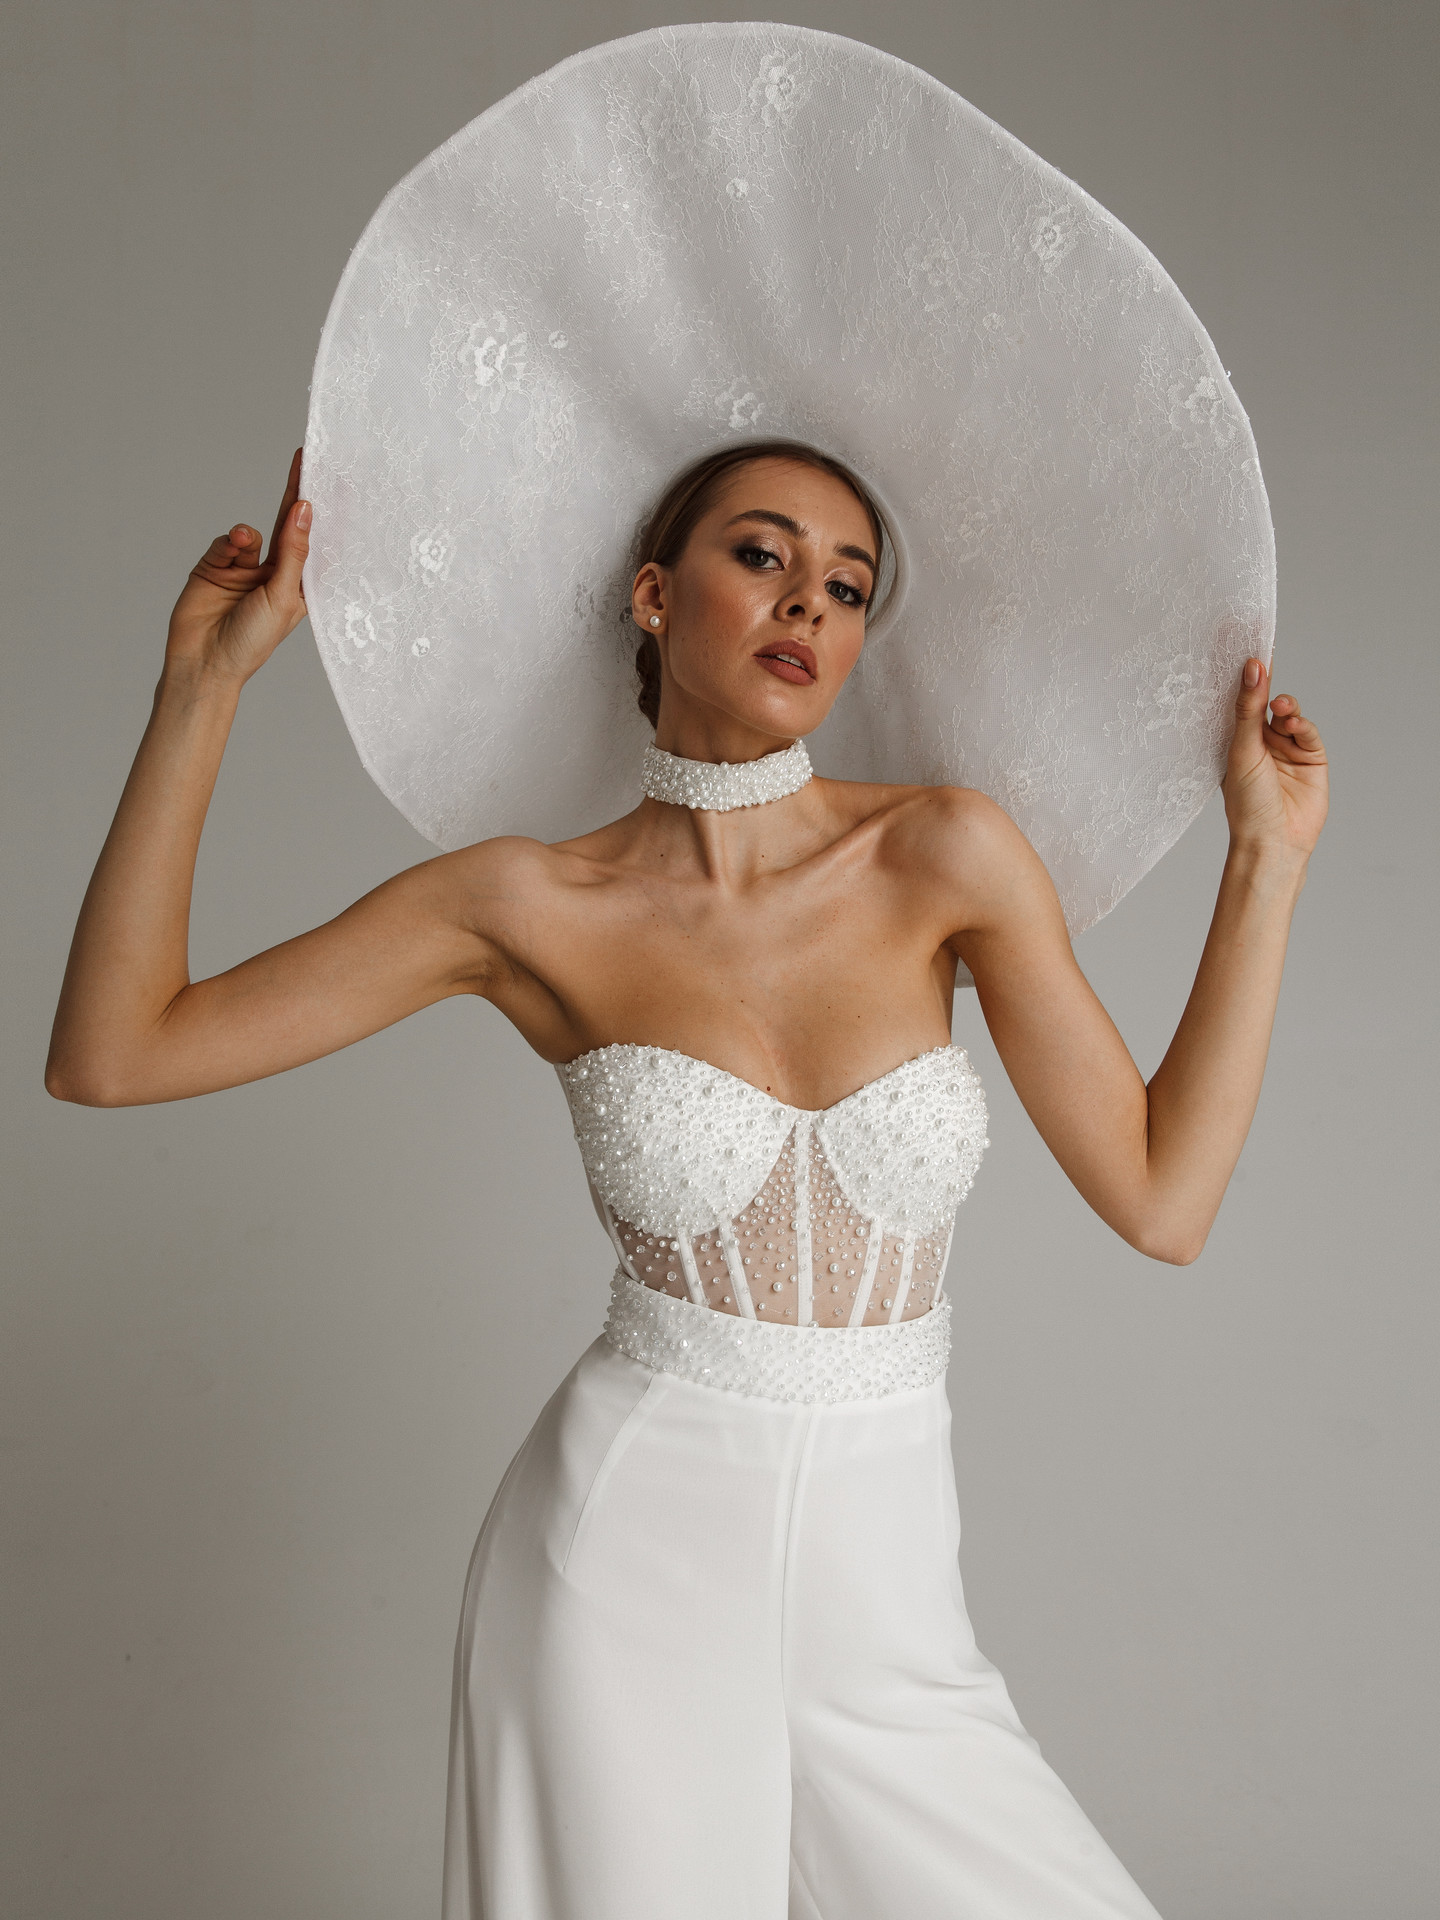 Wide-brimmed hat, accessories, headdress, bridal, off-white, beaded bridal suit, hat